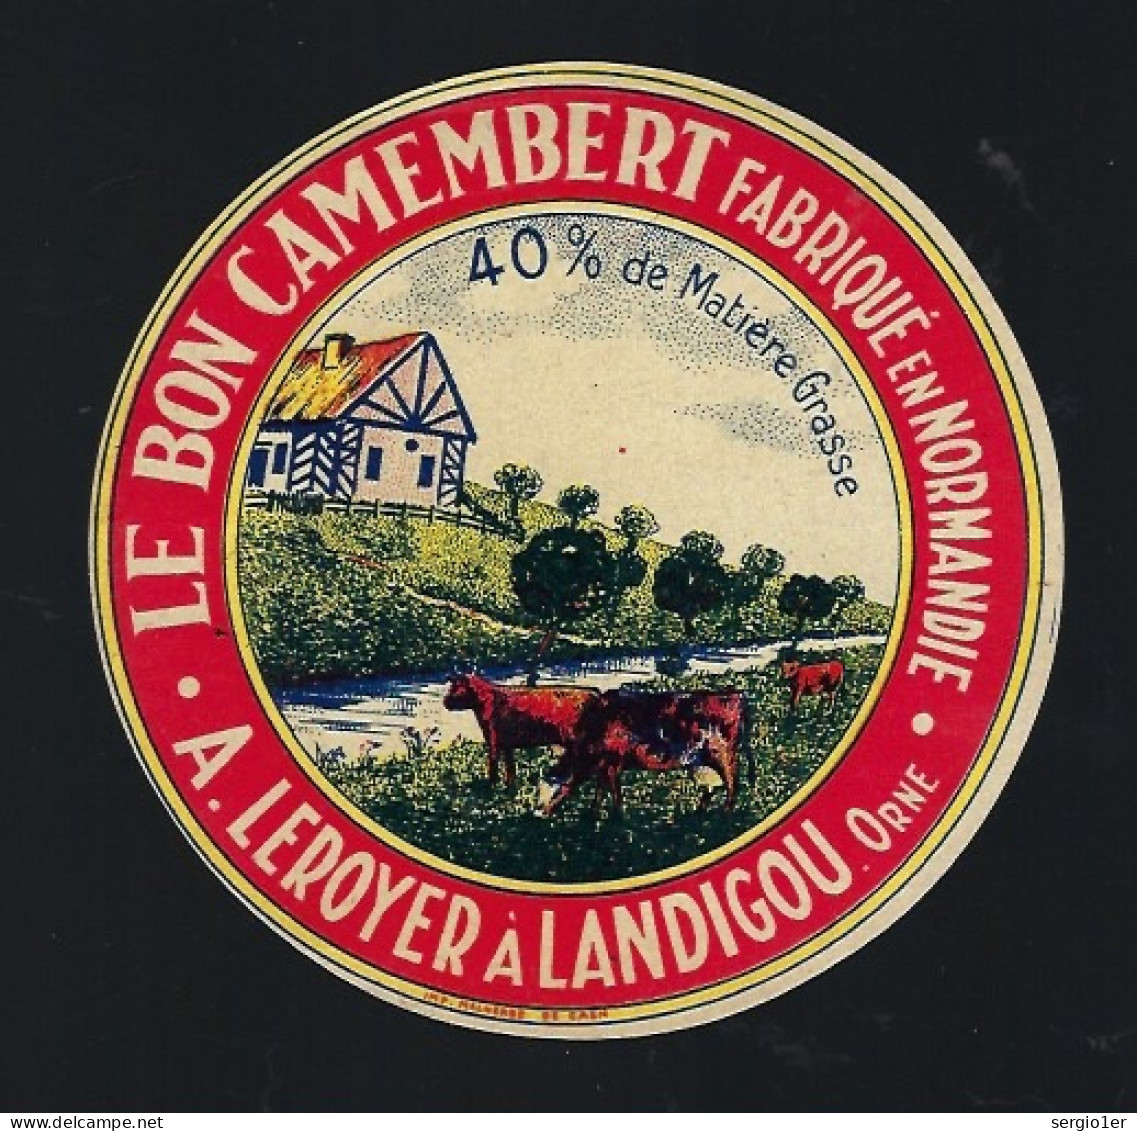 Etiquette Fromage Camembert Normandie 40%mg A Leroyer Langidou Orne 61 - Quesos